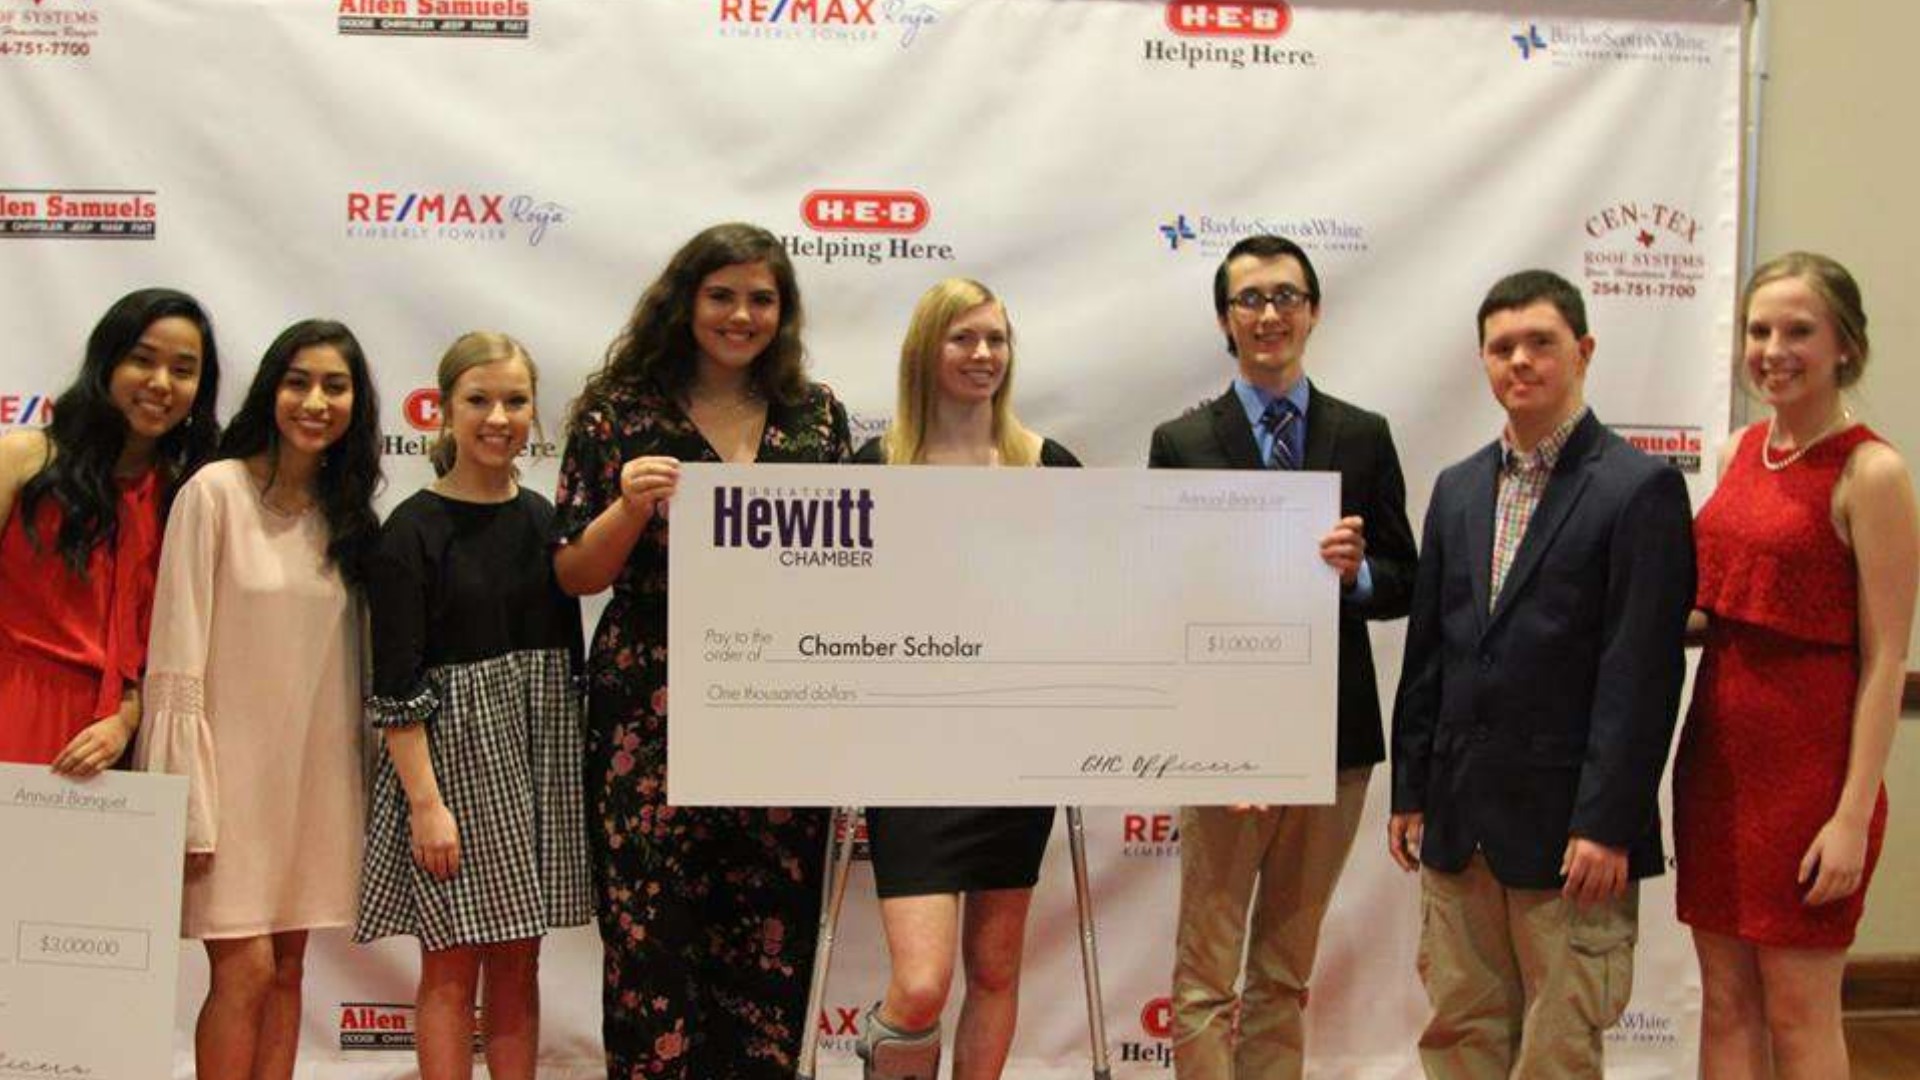 The Greater Hewitt Chamber of Commerce is now accepting applications for their scholarships. They will be awarding $10,000 in scholarships in 2020.